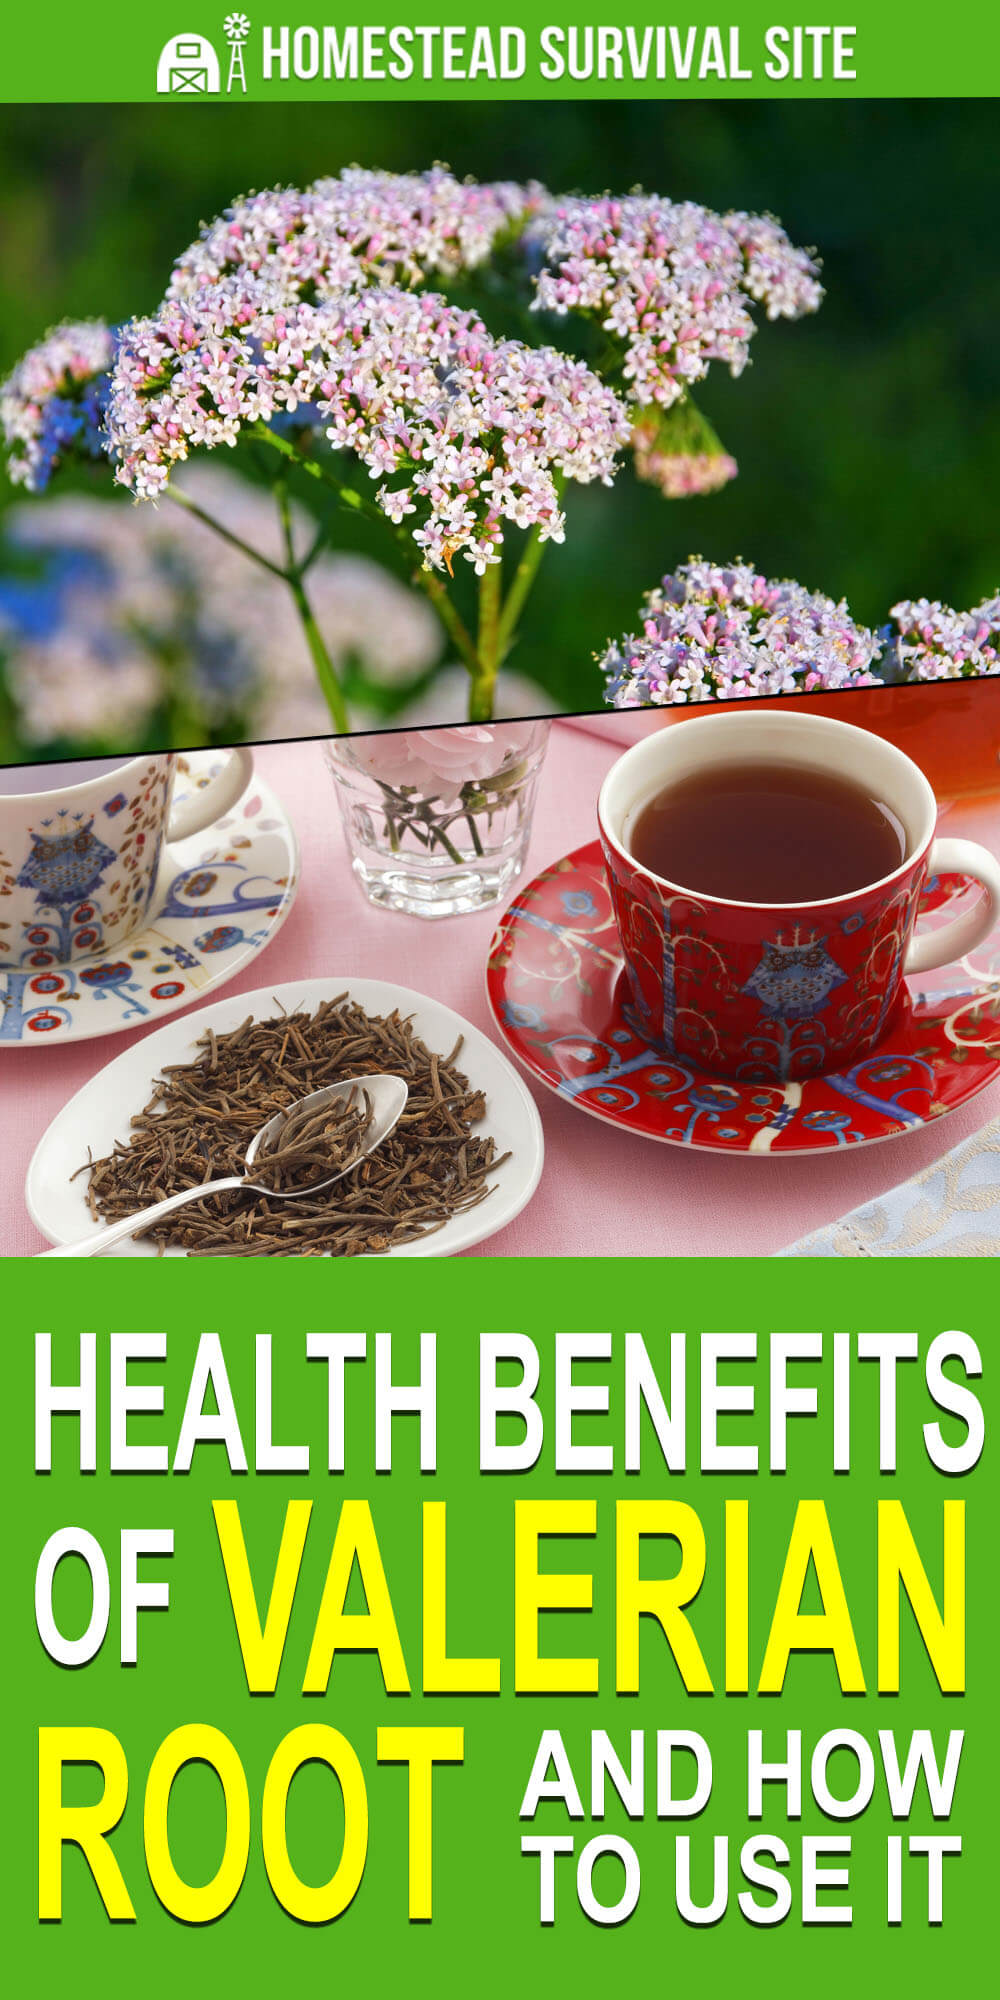 Health Benefits of Valerian Root and How to Use It